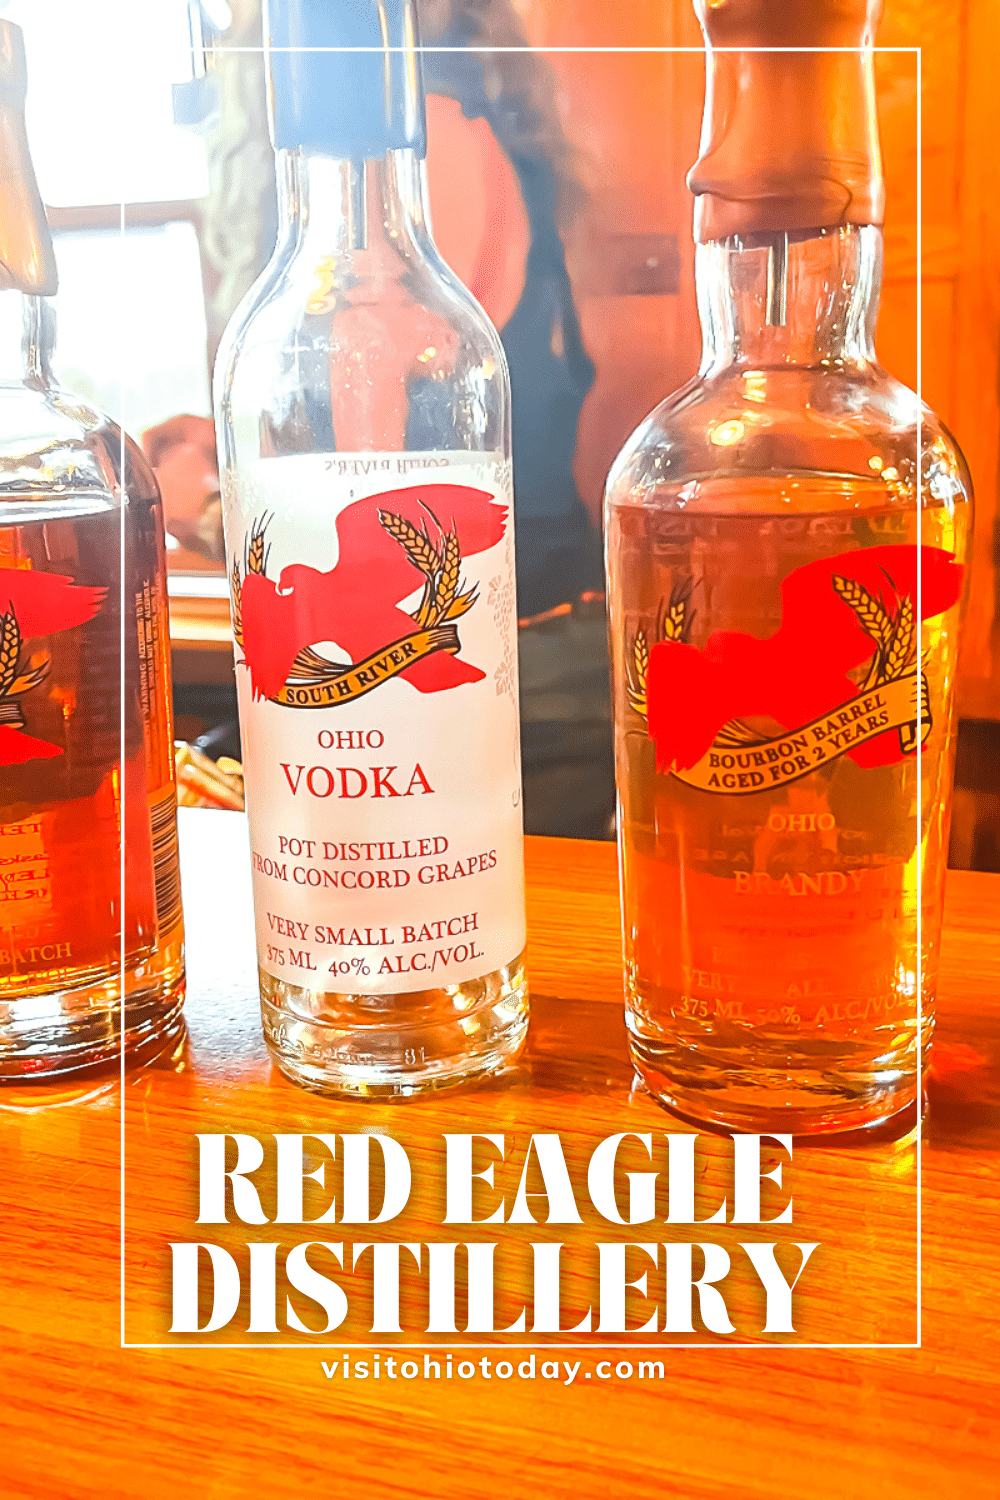 Red Eagle Distillery is located in Geneva, Ohio. Red Eagle Distillery is in a beautiful barn that dates back to the 1800’s. This is the first bourbon and whiskey to be made legally in Ohio since the prohibition. #ohio #ohiodistillery #redeagledistillery